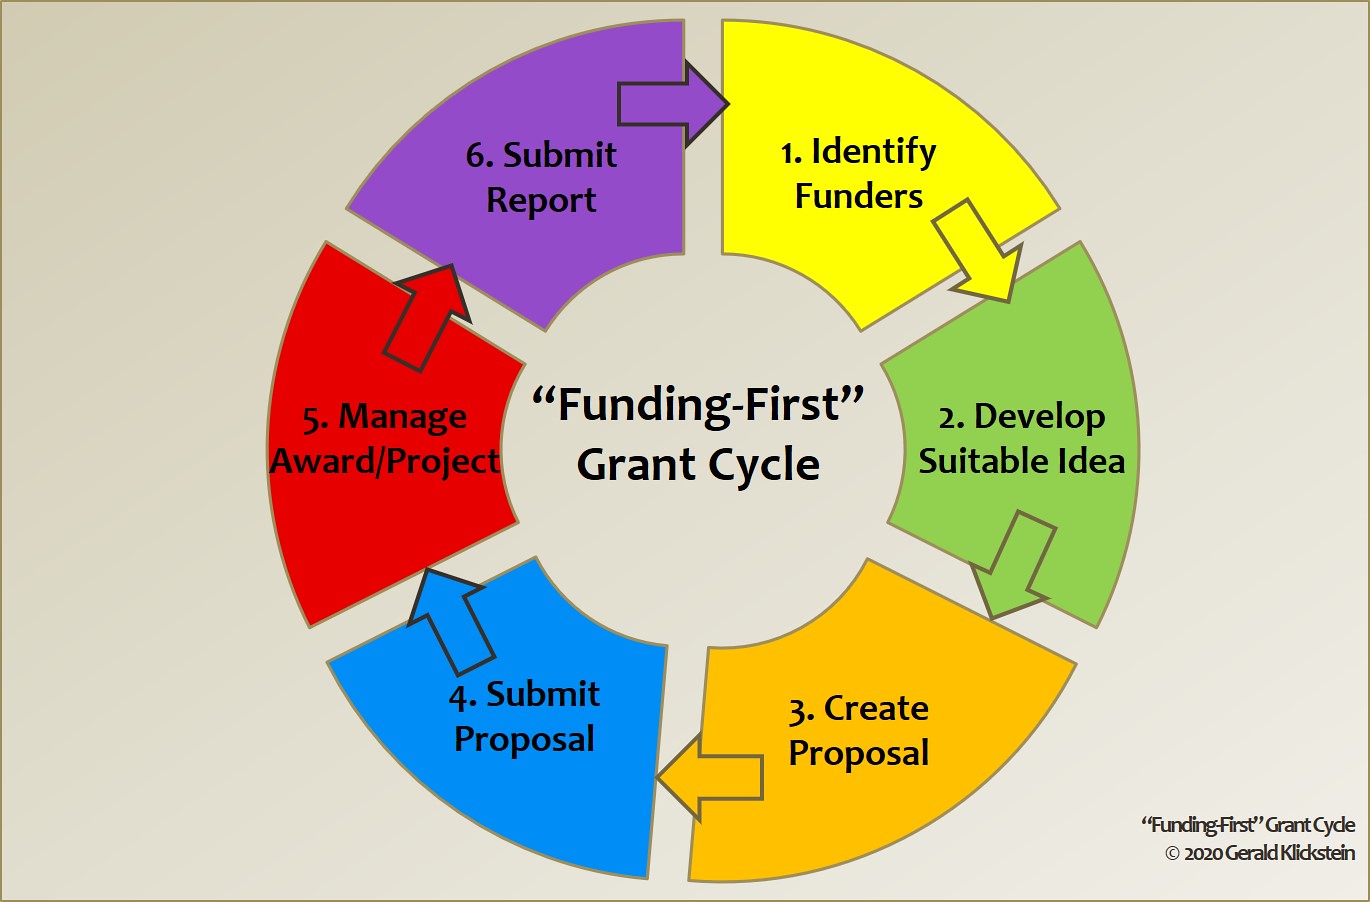 depiction of The 'Funding-First' Grant Cycle by Gerald Klickstein